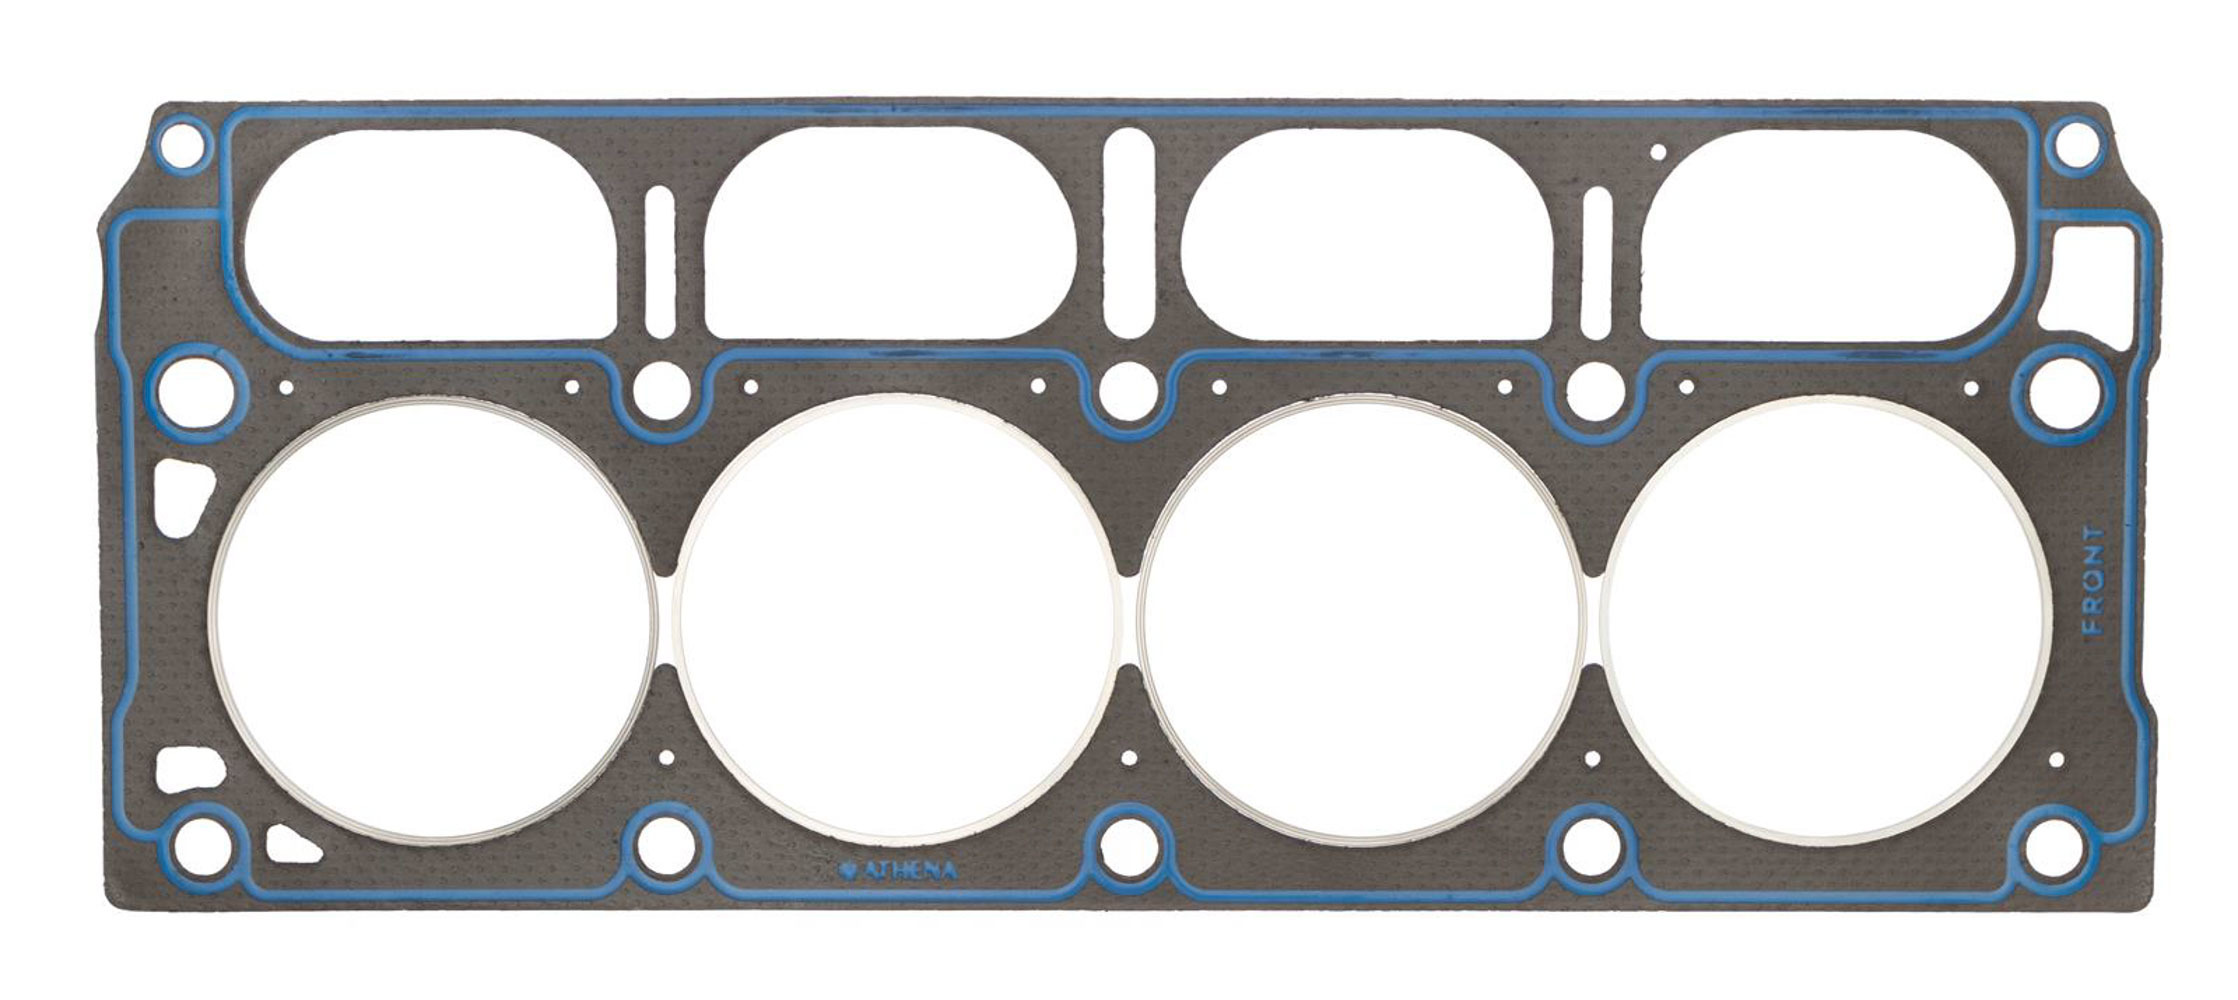 SCE Gaskets CR271555 - Cylinder Head Gasket, Vulcan Cut Ring, 4.150 in Bore, 0.055 in Compression Thickness, Steel Core Laminate, GM LT-Series, Each